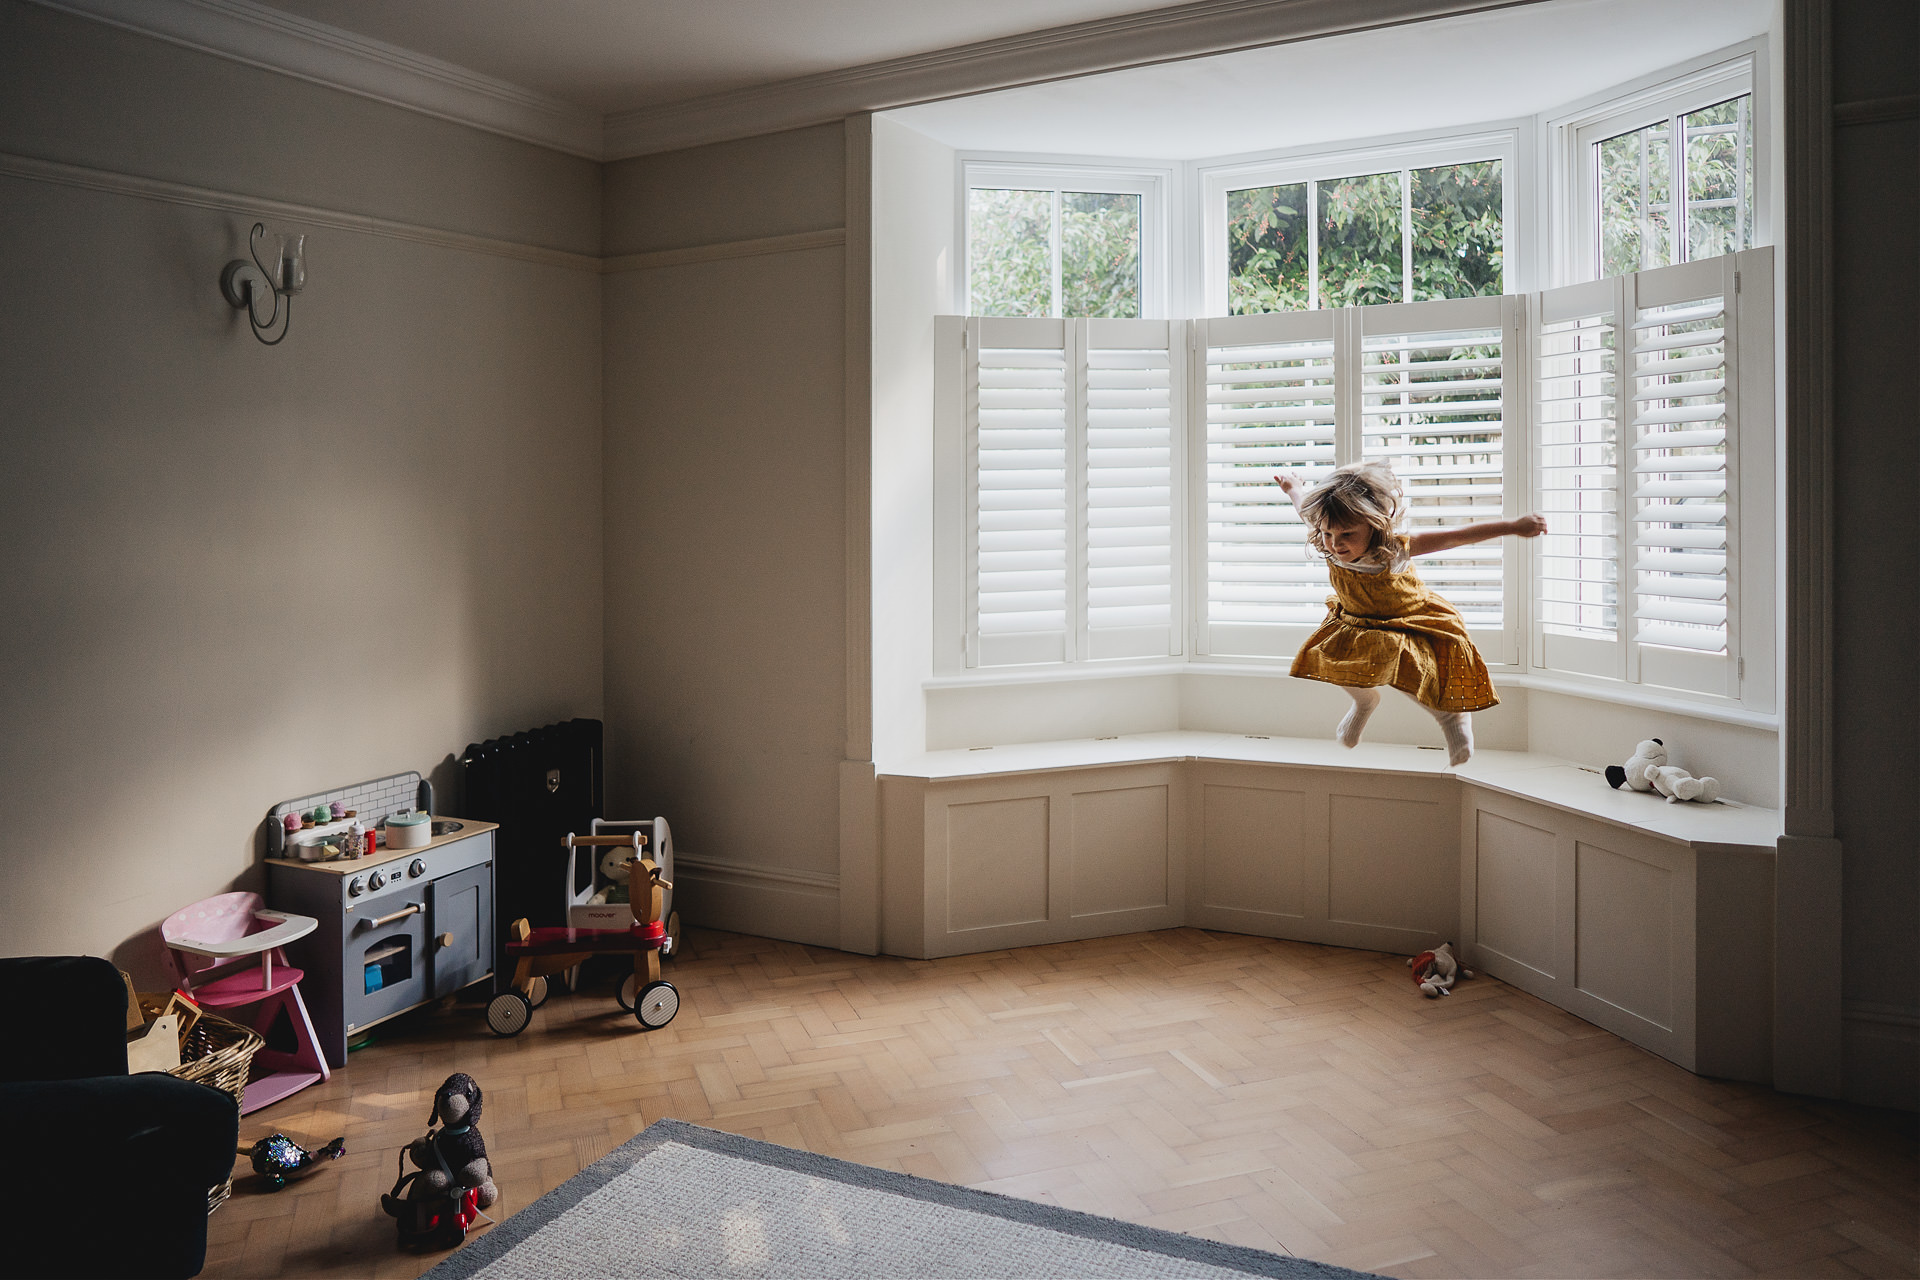 A young girl jumping off a window ledge in a living room